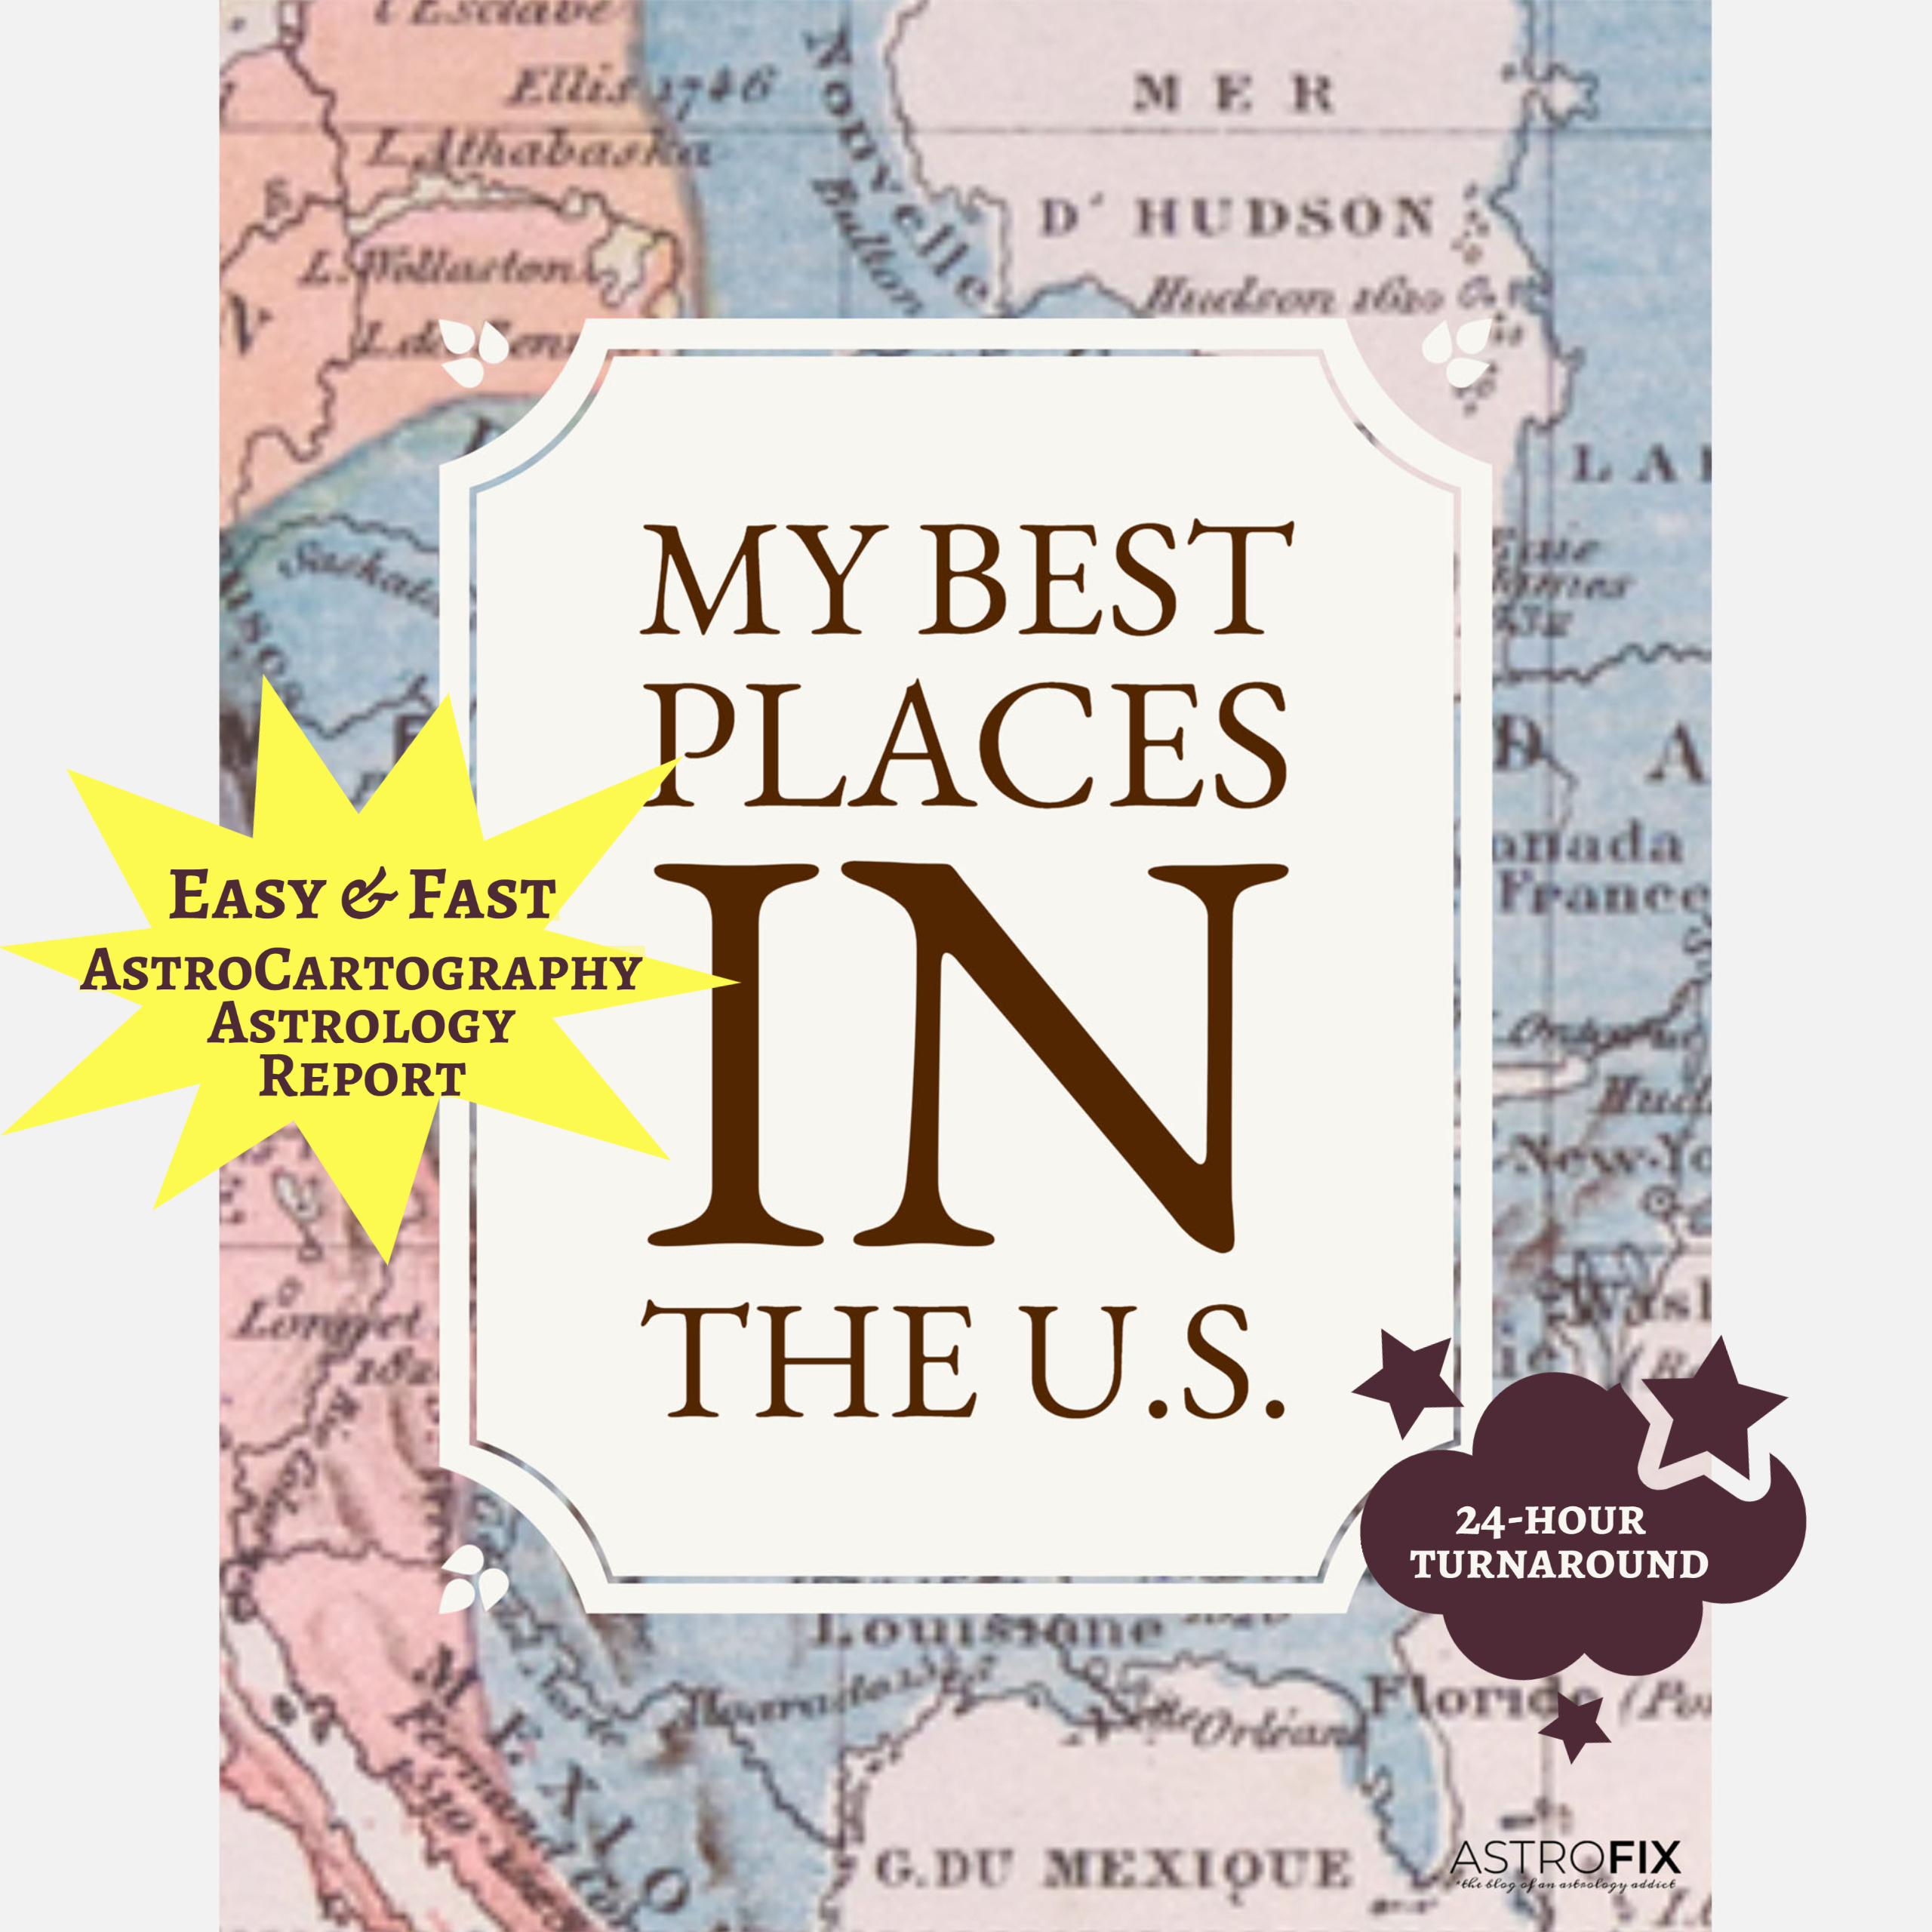 My Best Places in the United States AstroCartography Report,My Best Places in the United States AstroCartography Astrology Report,My Best Places in the United States Relocation Report,the United States AstroCartography Report,astrocartography relocation astrology,astrolocality the United States,relocate